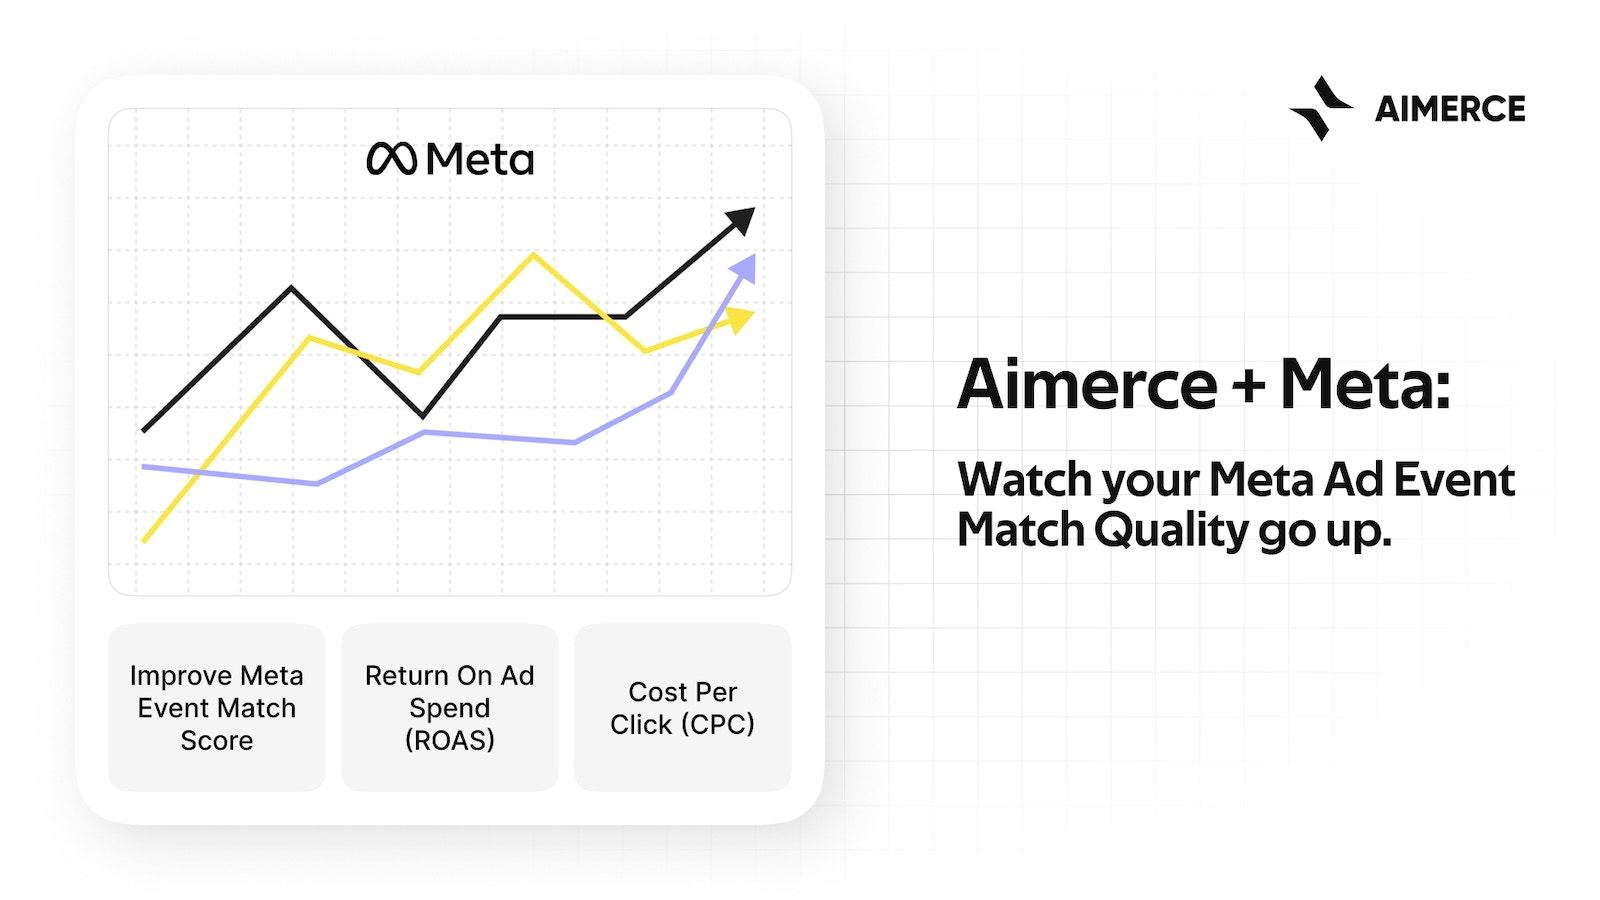 Supercharge Meta Ad ROAS with EMQ score going up